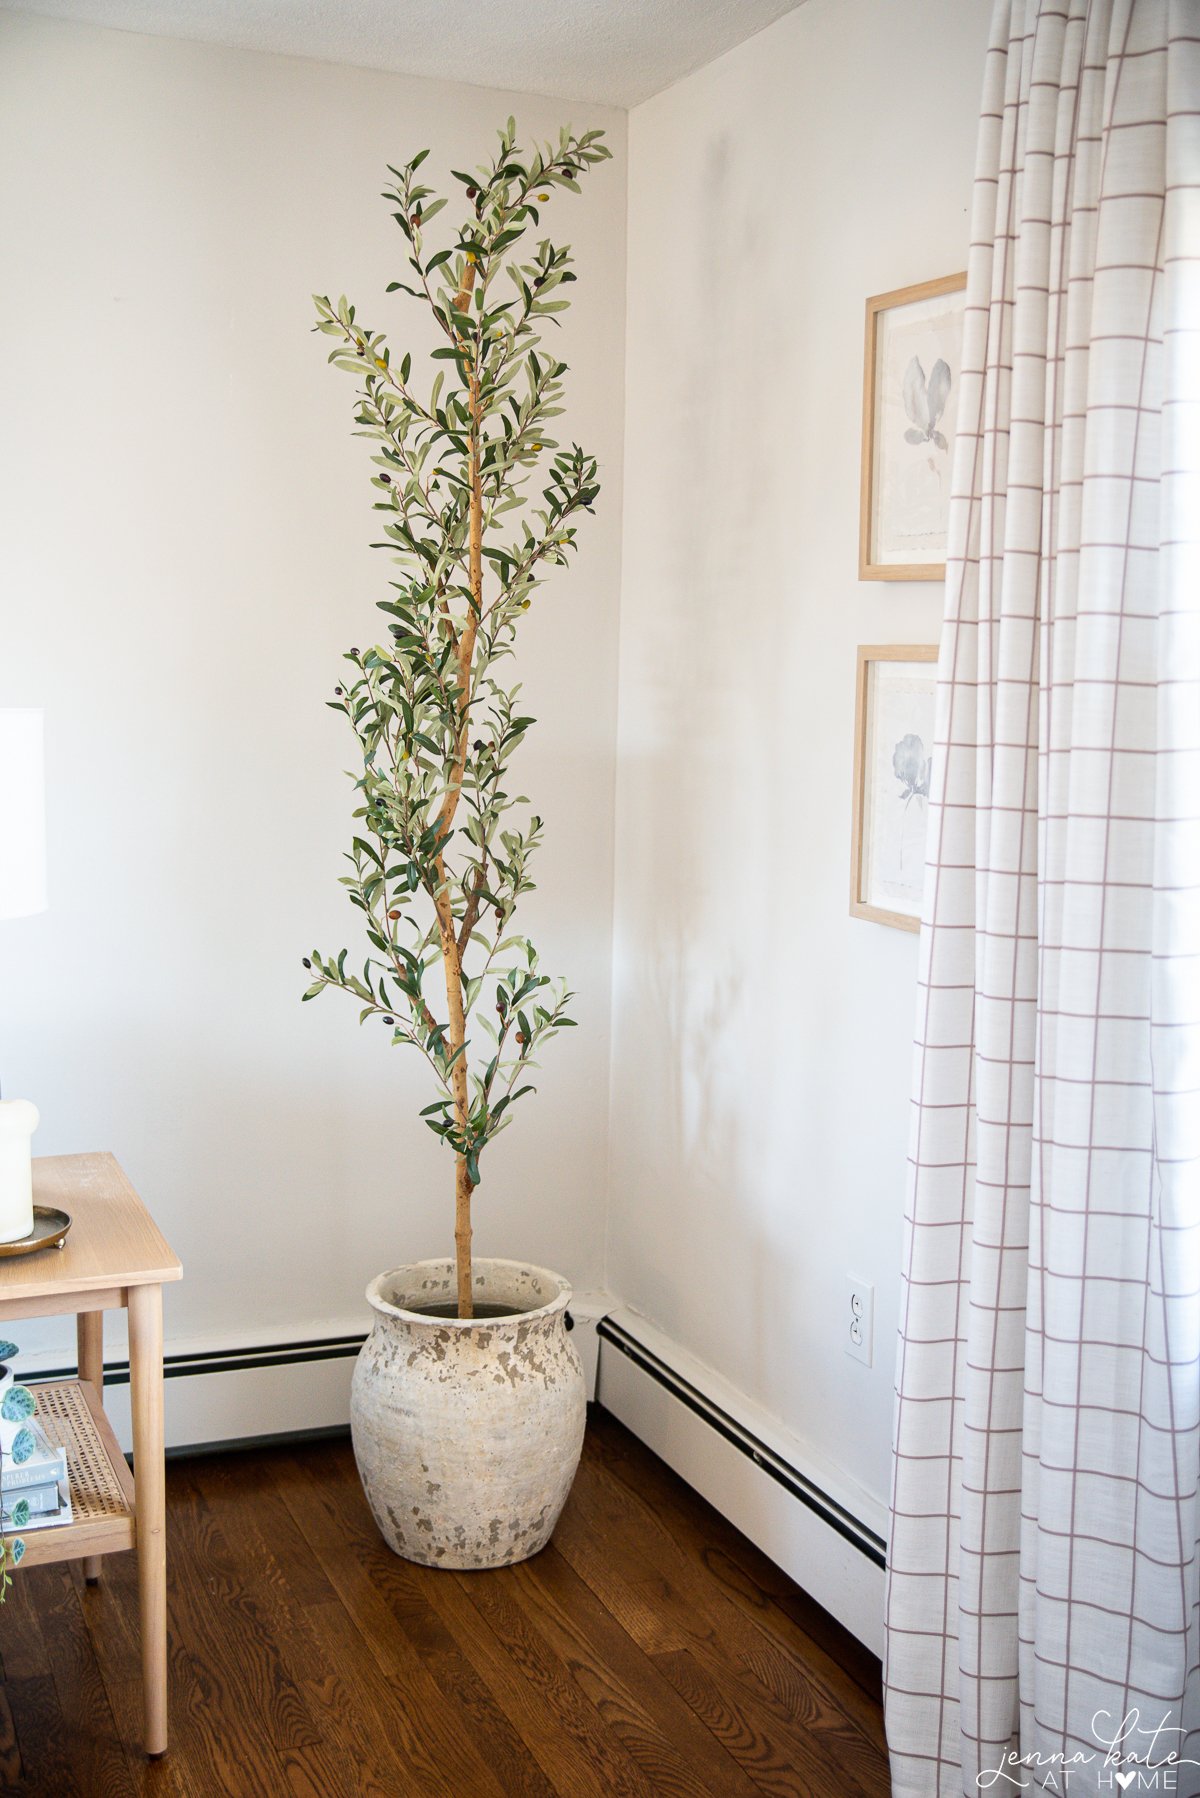 Amazon faux olive tree in a large ceramic planter